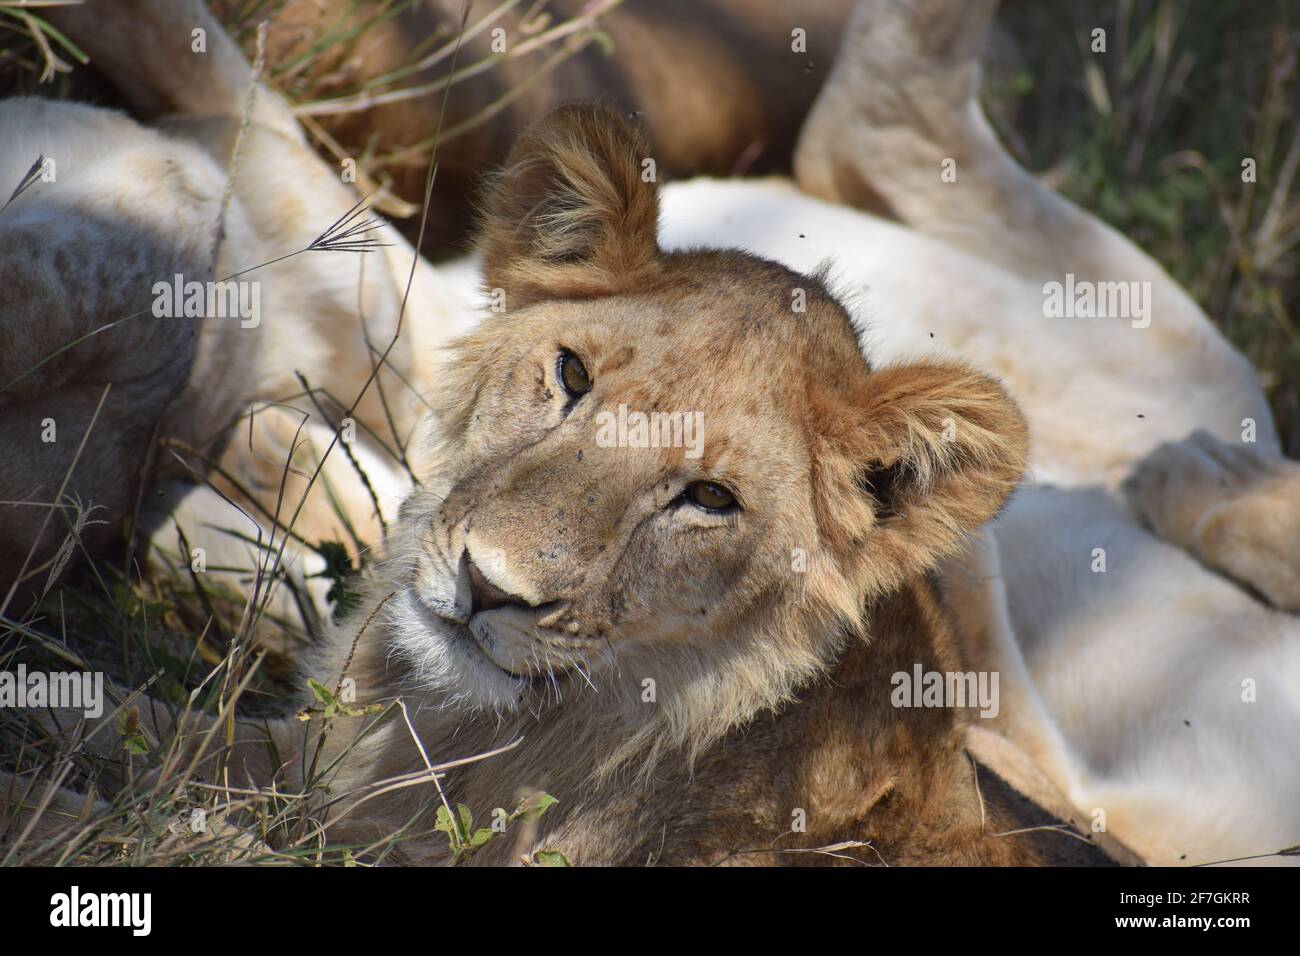 A Photograph of a Lion Cub taken in the Serengeti, Tanzania 2017. Stock Photo